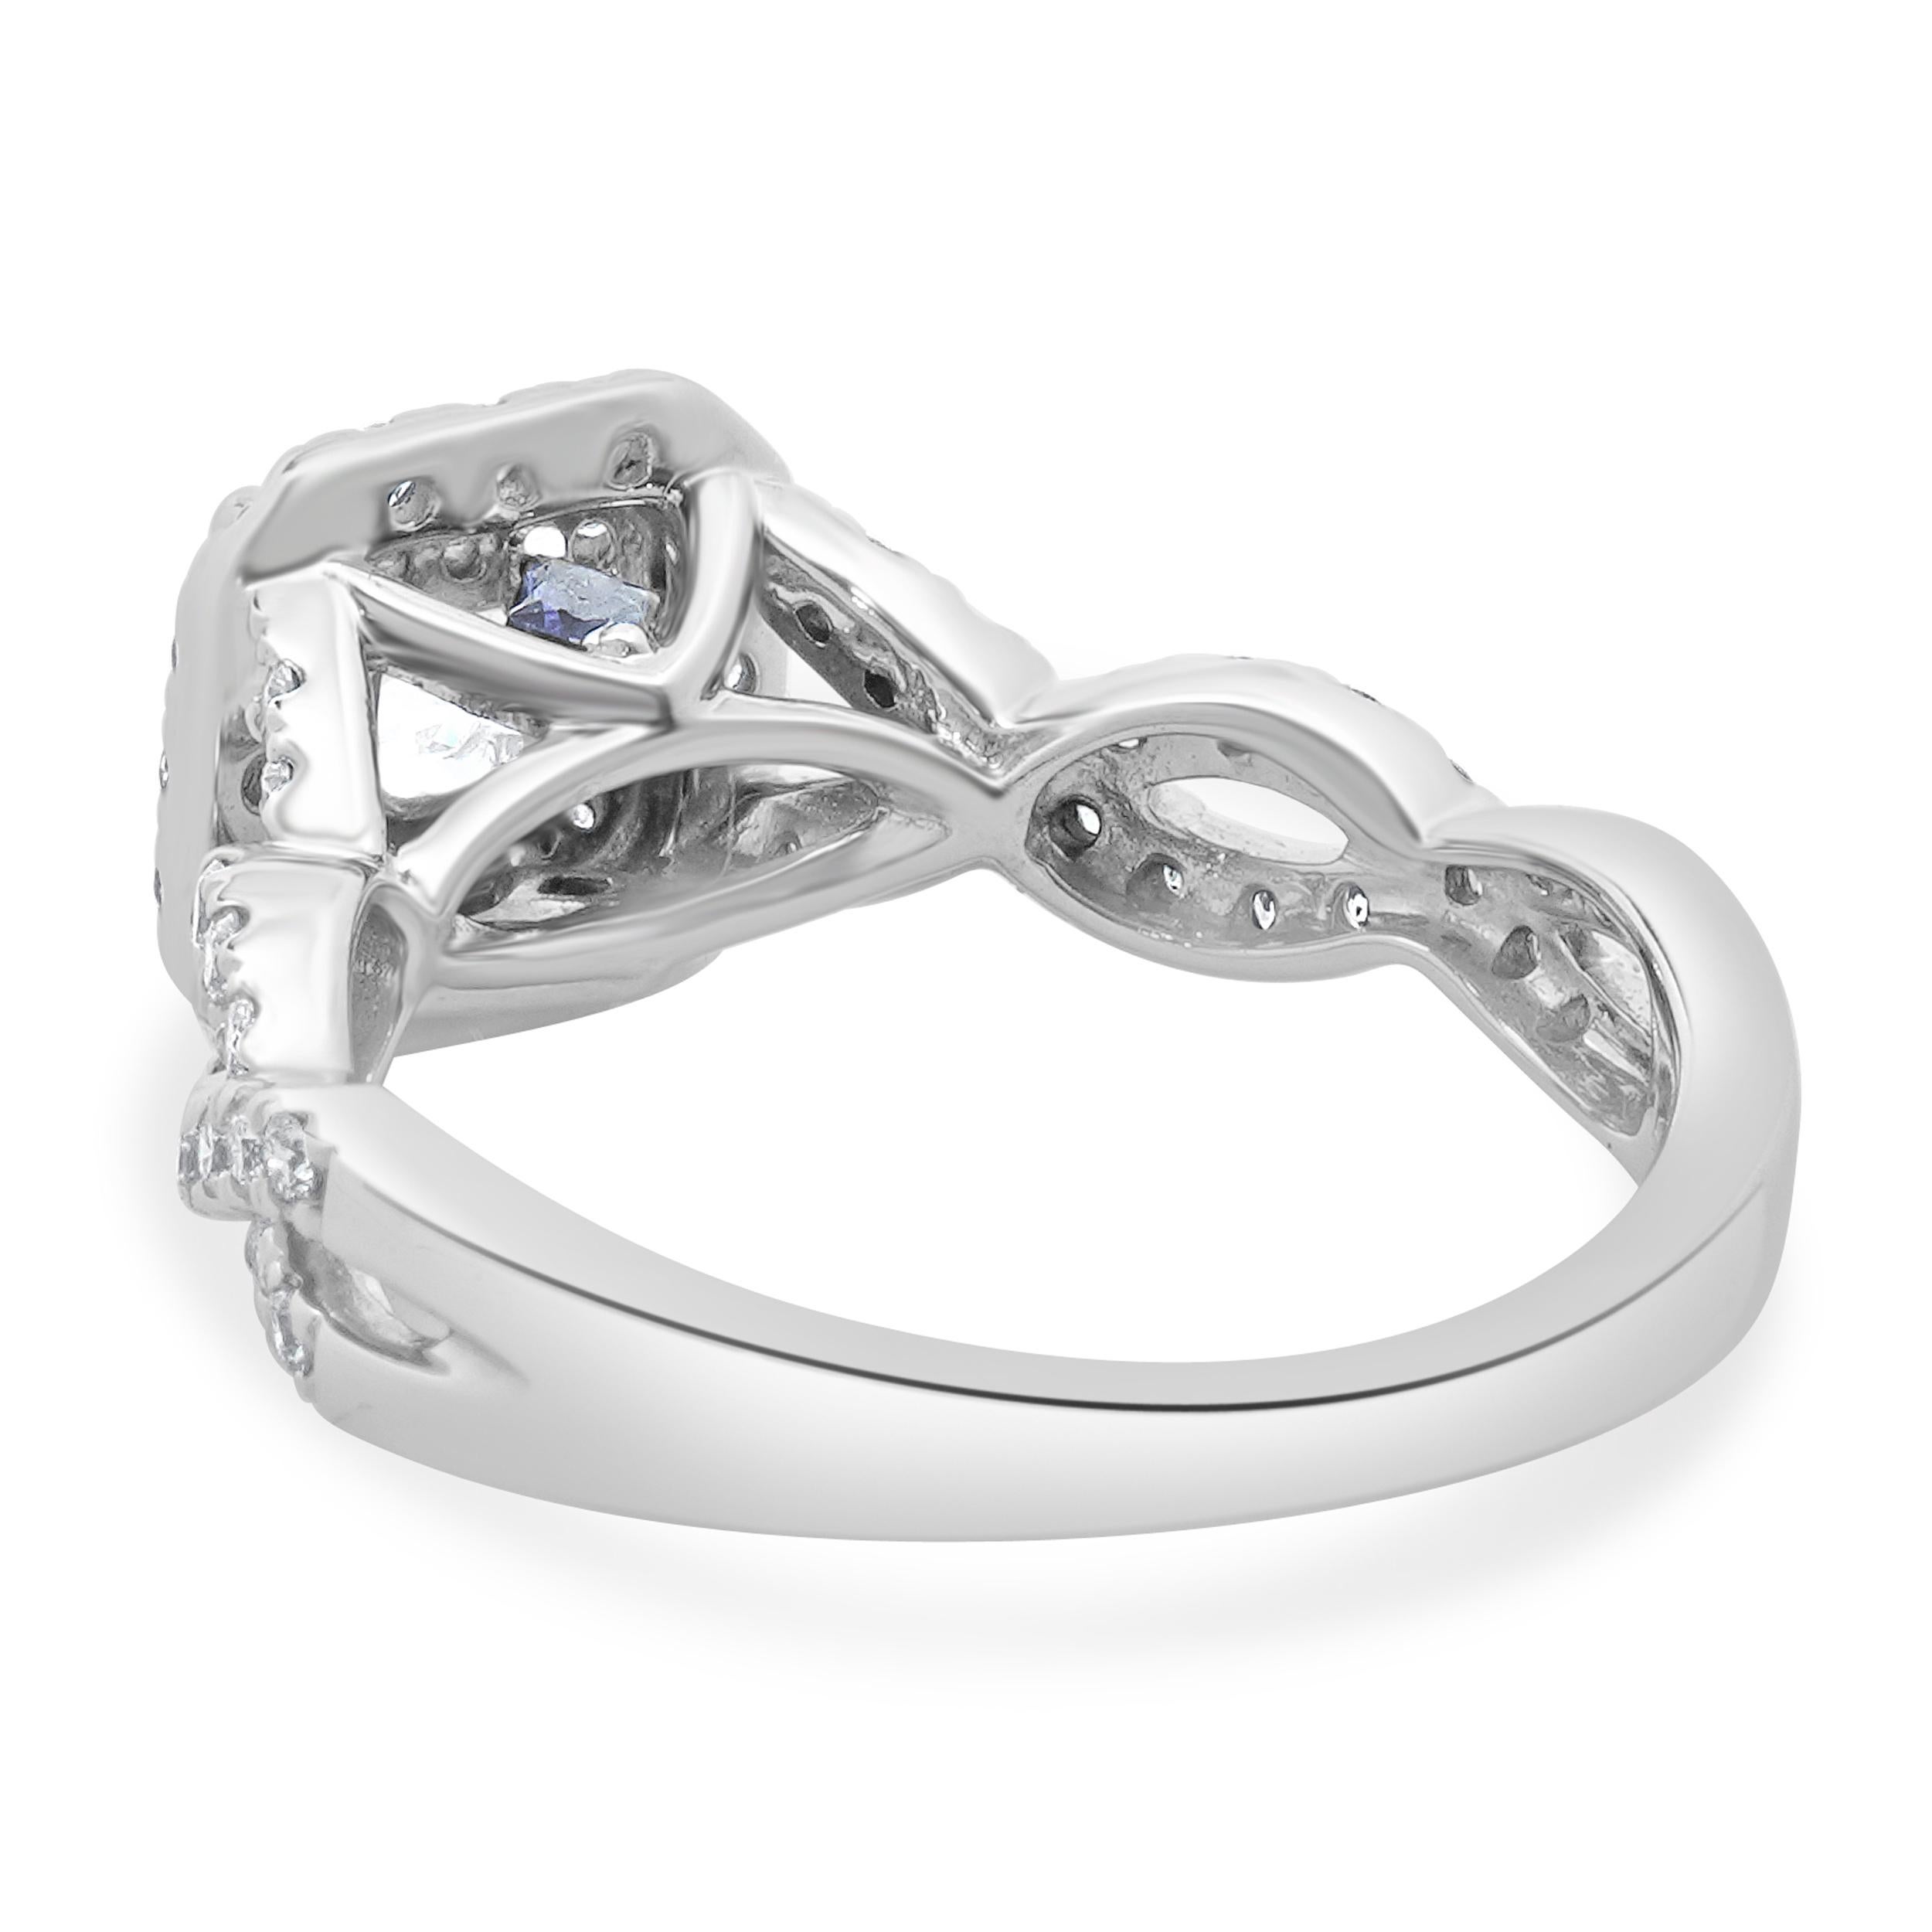 Vera Wang 14 Karat White Gold Princess Cut Diamond Engagement Ring In Excellent Condition For Sale In Scottsdale, AZ